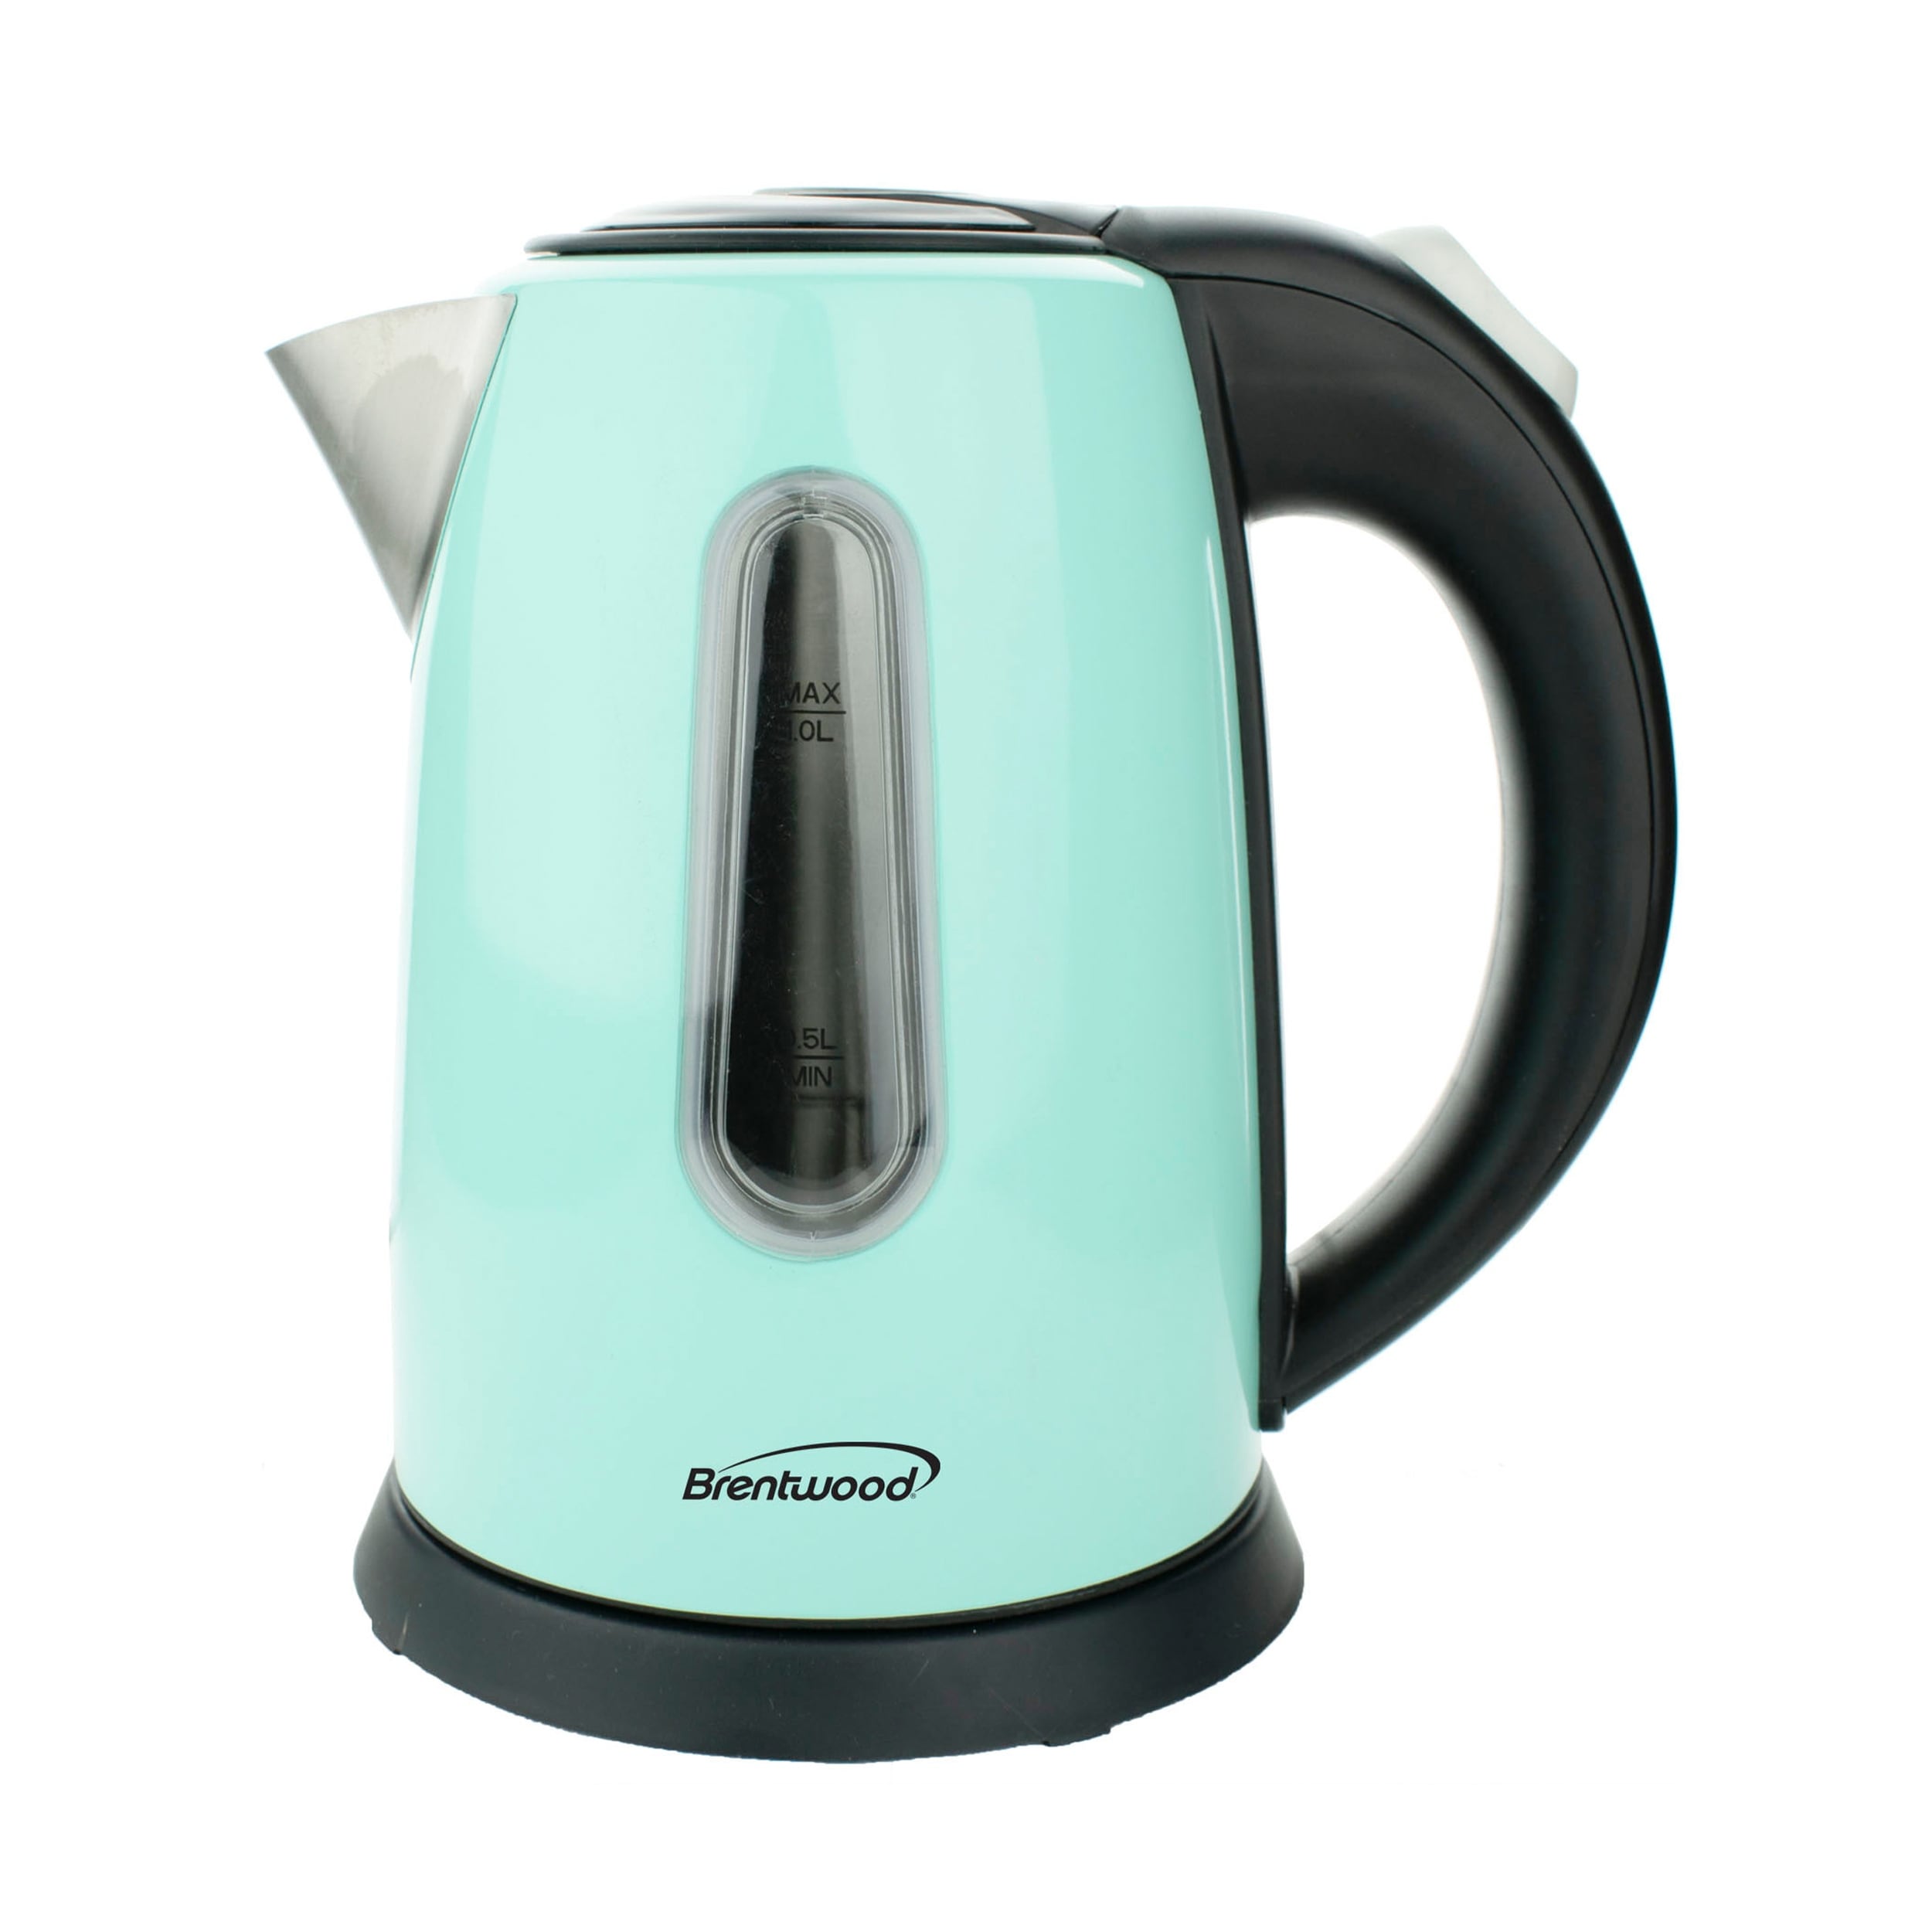 https://ak1.ostkcdn.com/images/products/is/images/direct/78a9b769d766bc27b76181136318ab16385c4026/Brentwood-1-Liter-Stainless-Steel-Cordless-Electric-Kettle-in-Blue.jpg